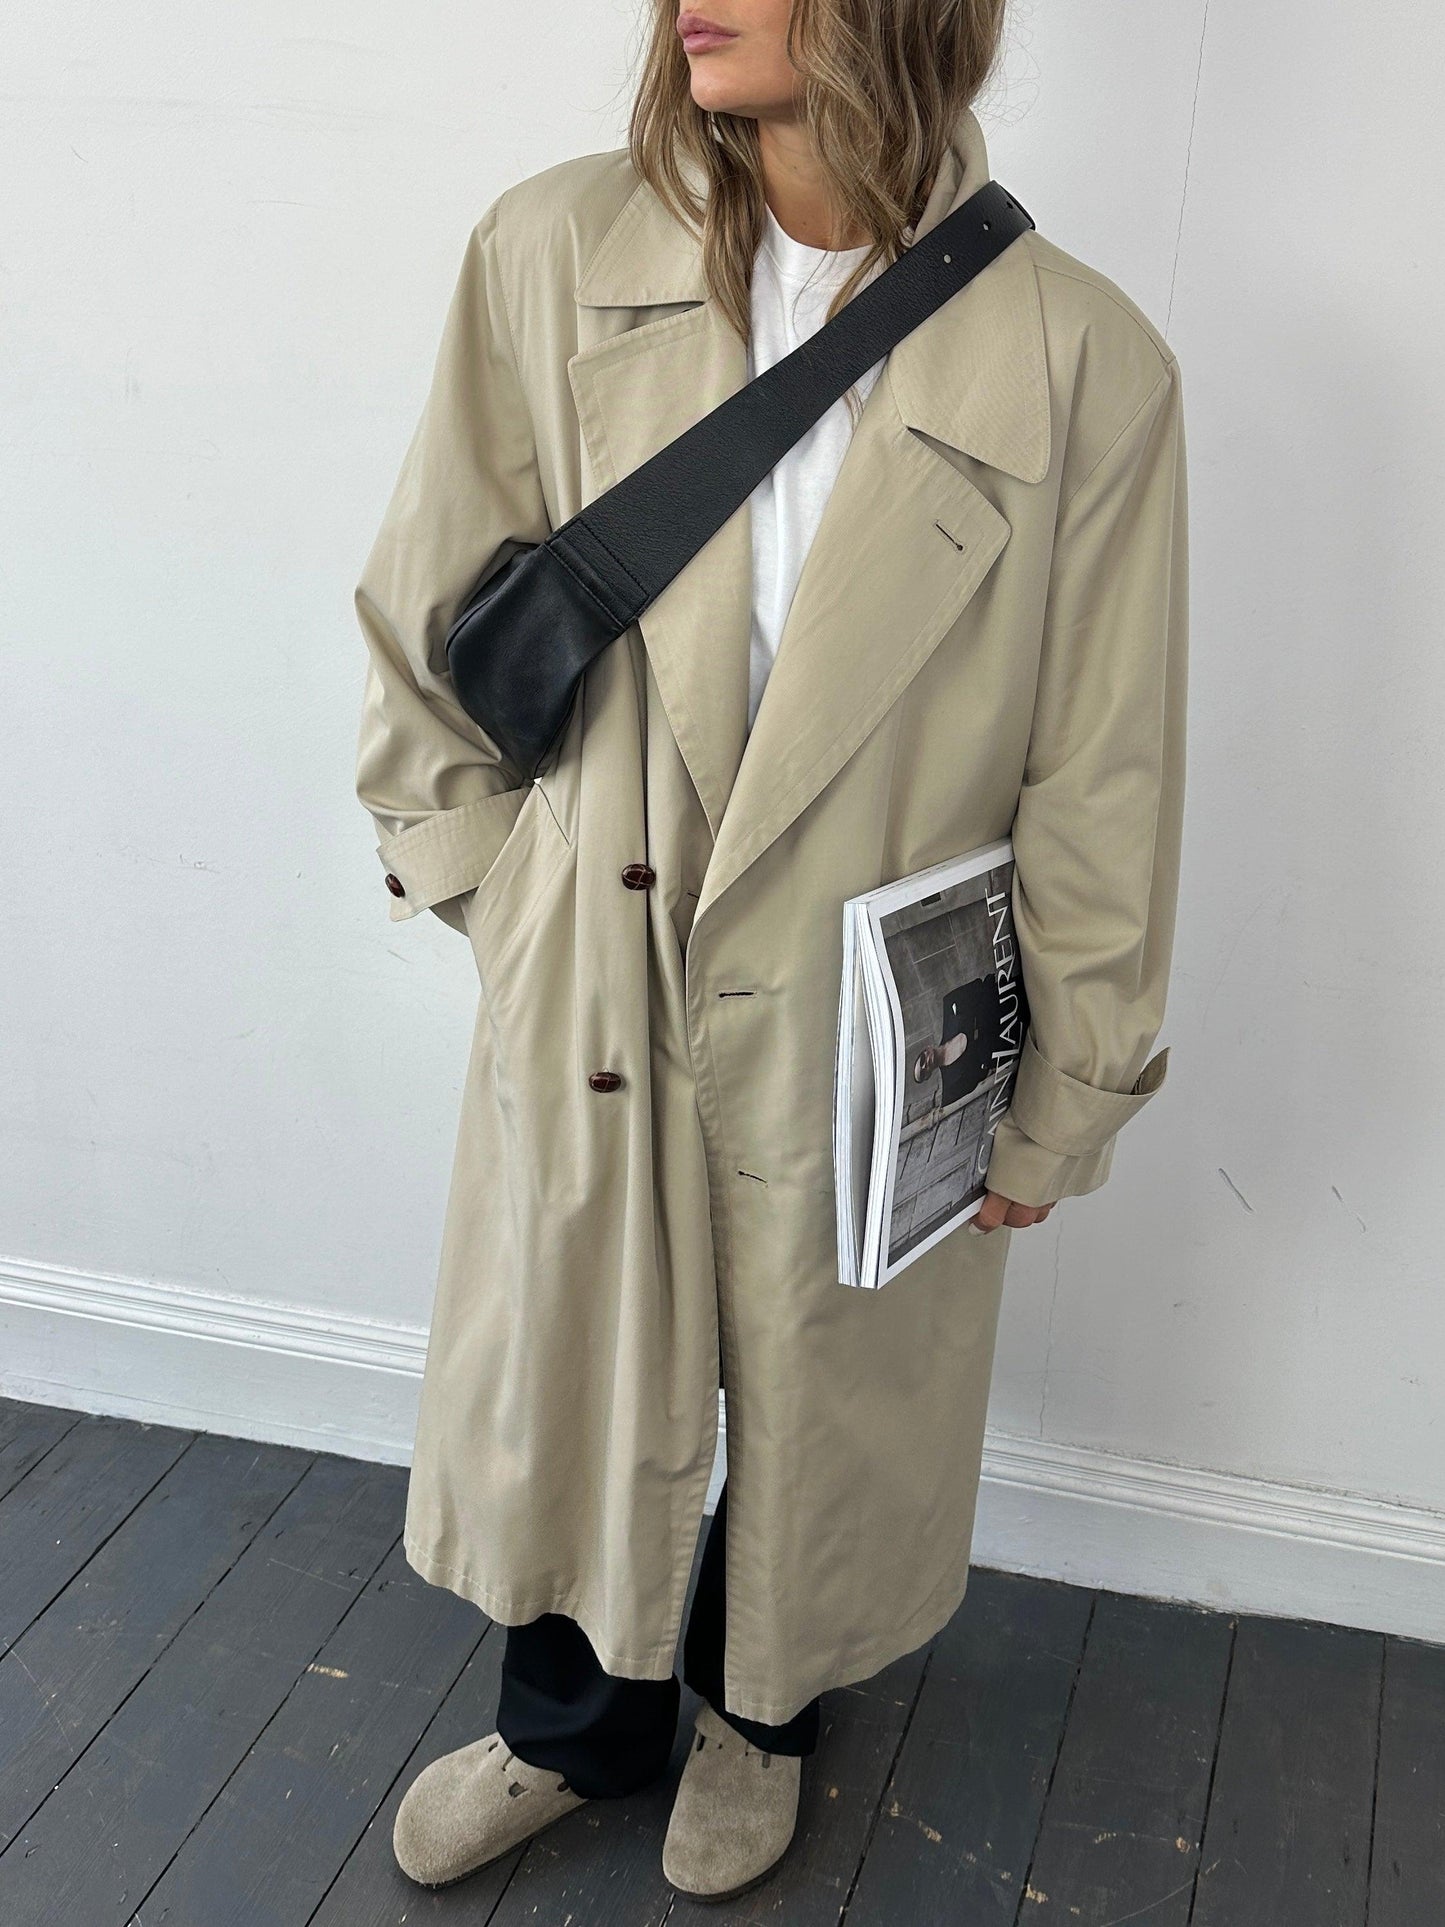 Italian Vintage Cotton Double Breasted Belted Trench Coat - XL - Known Source